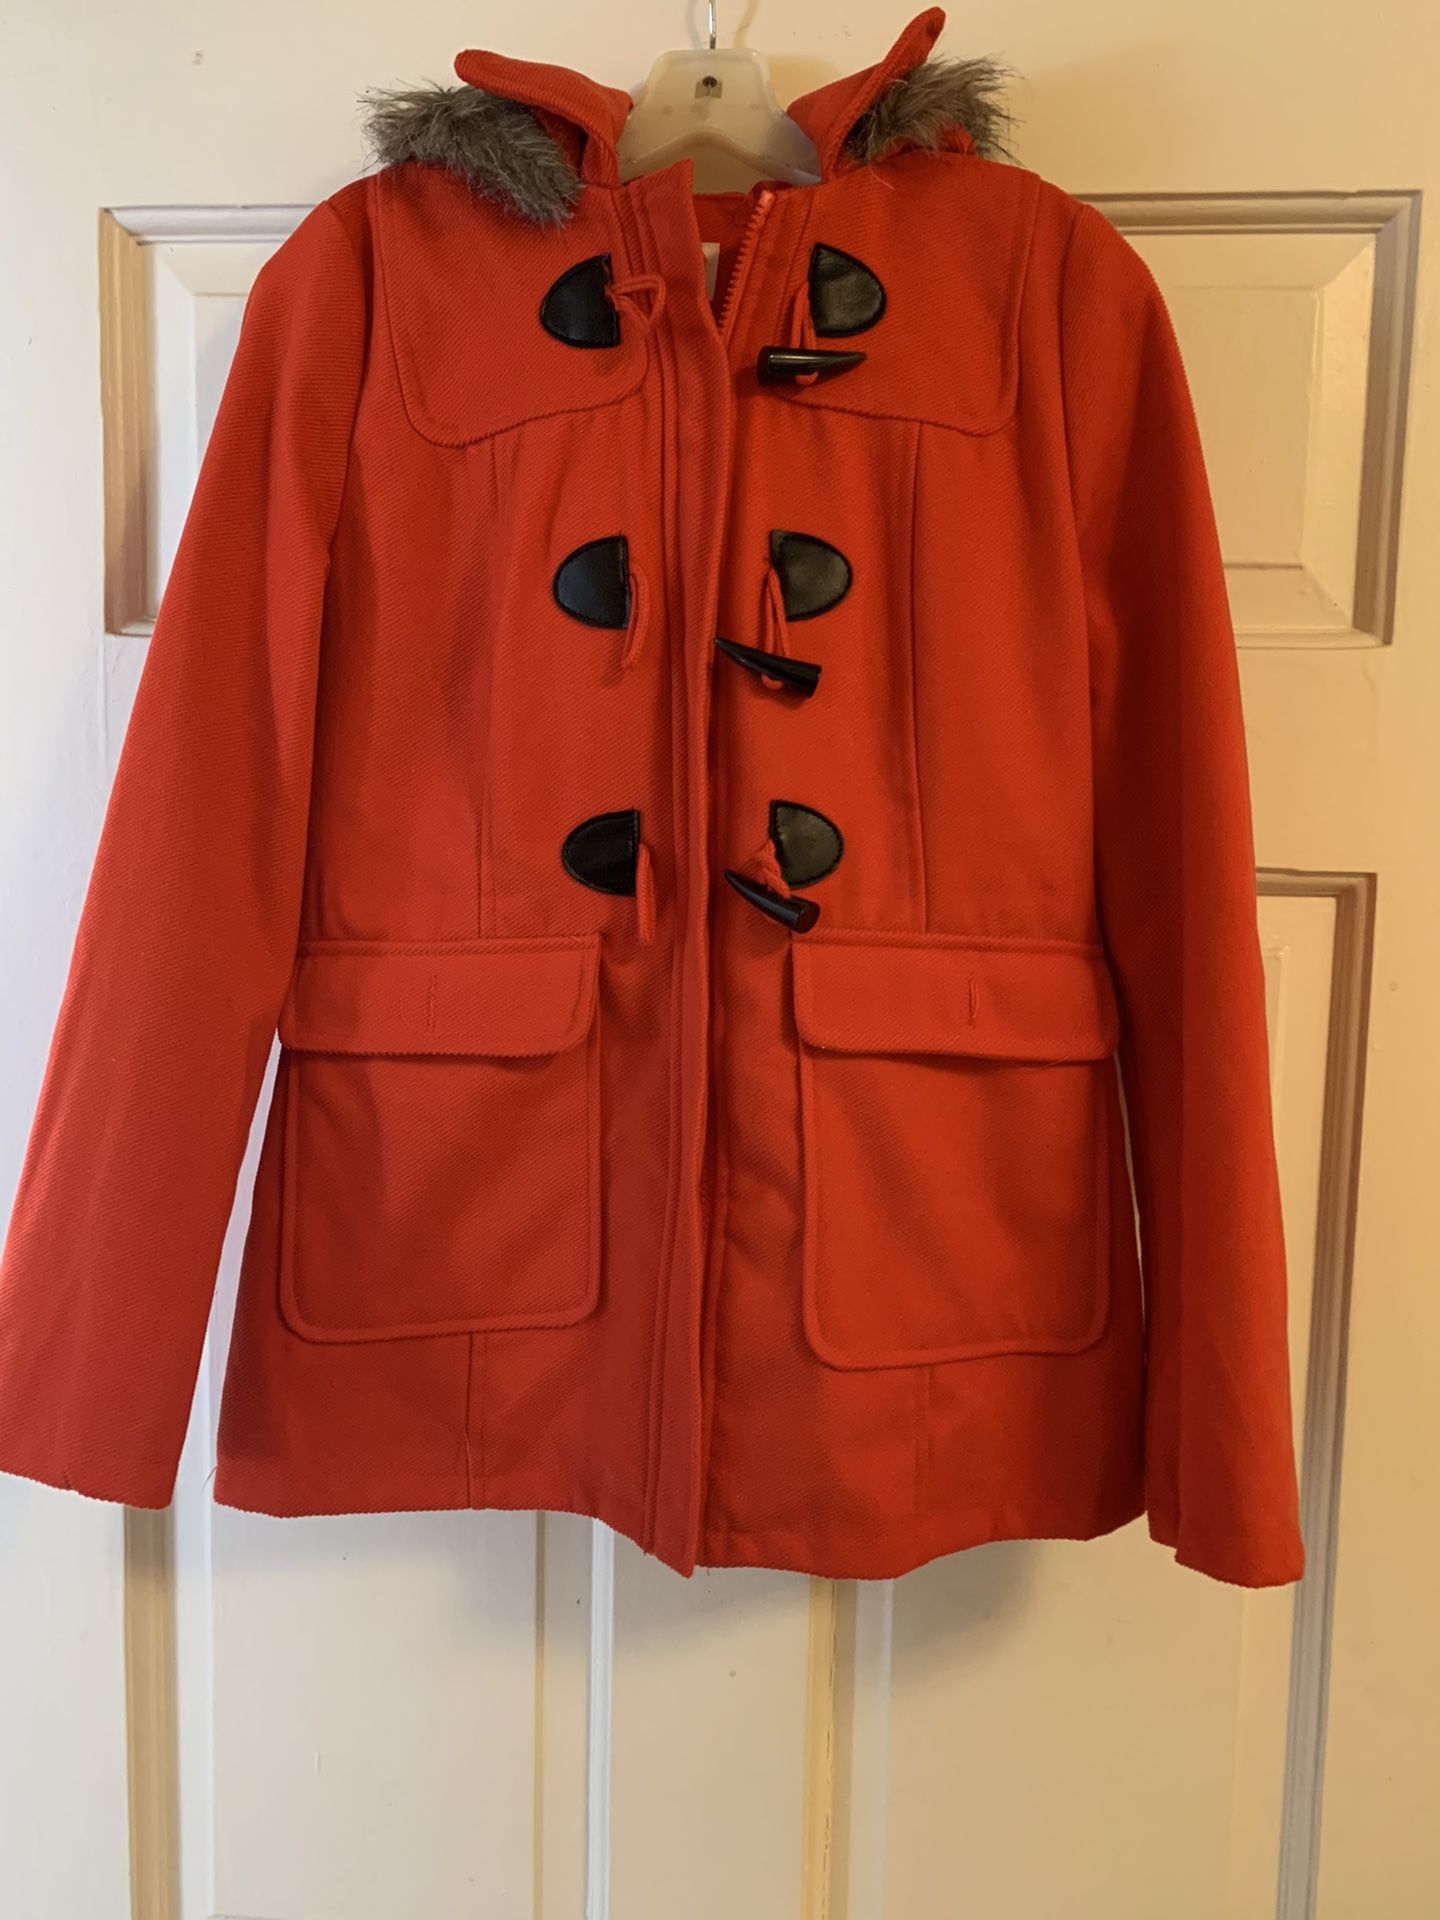 Salmon colored winter Jacket size M